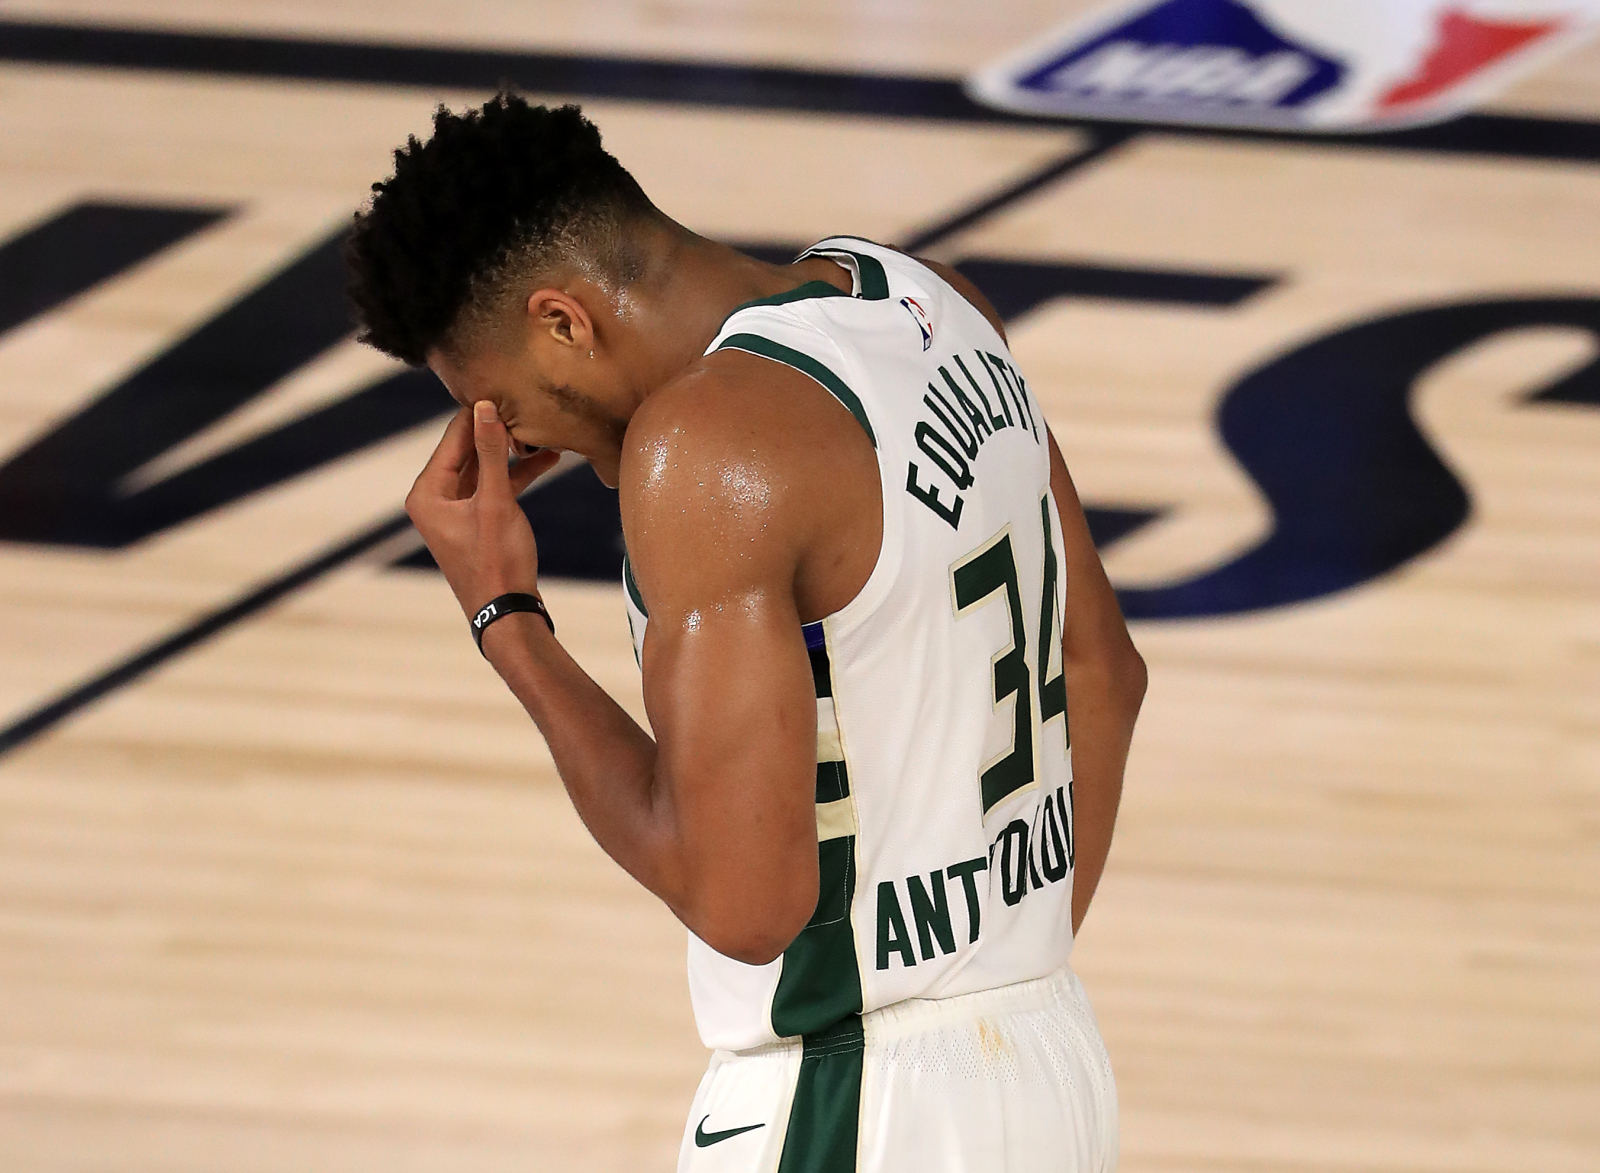 Warriors May Make A Play For Antetokounmpo In 2021